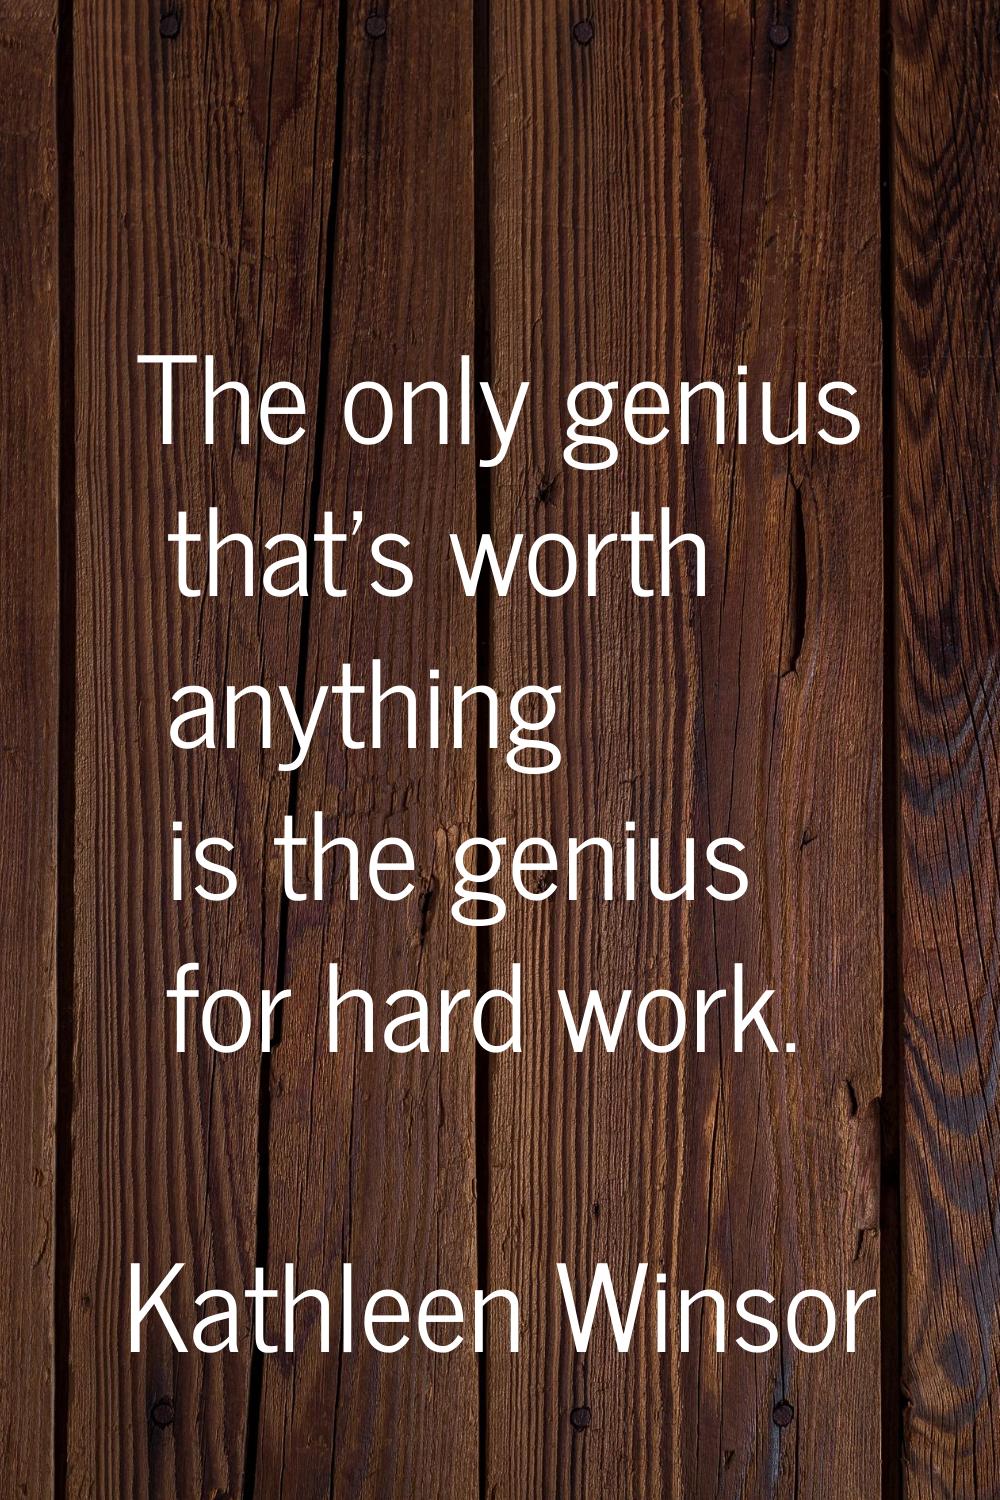 The only genius that's worth anything is the genius for hard work.